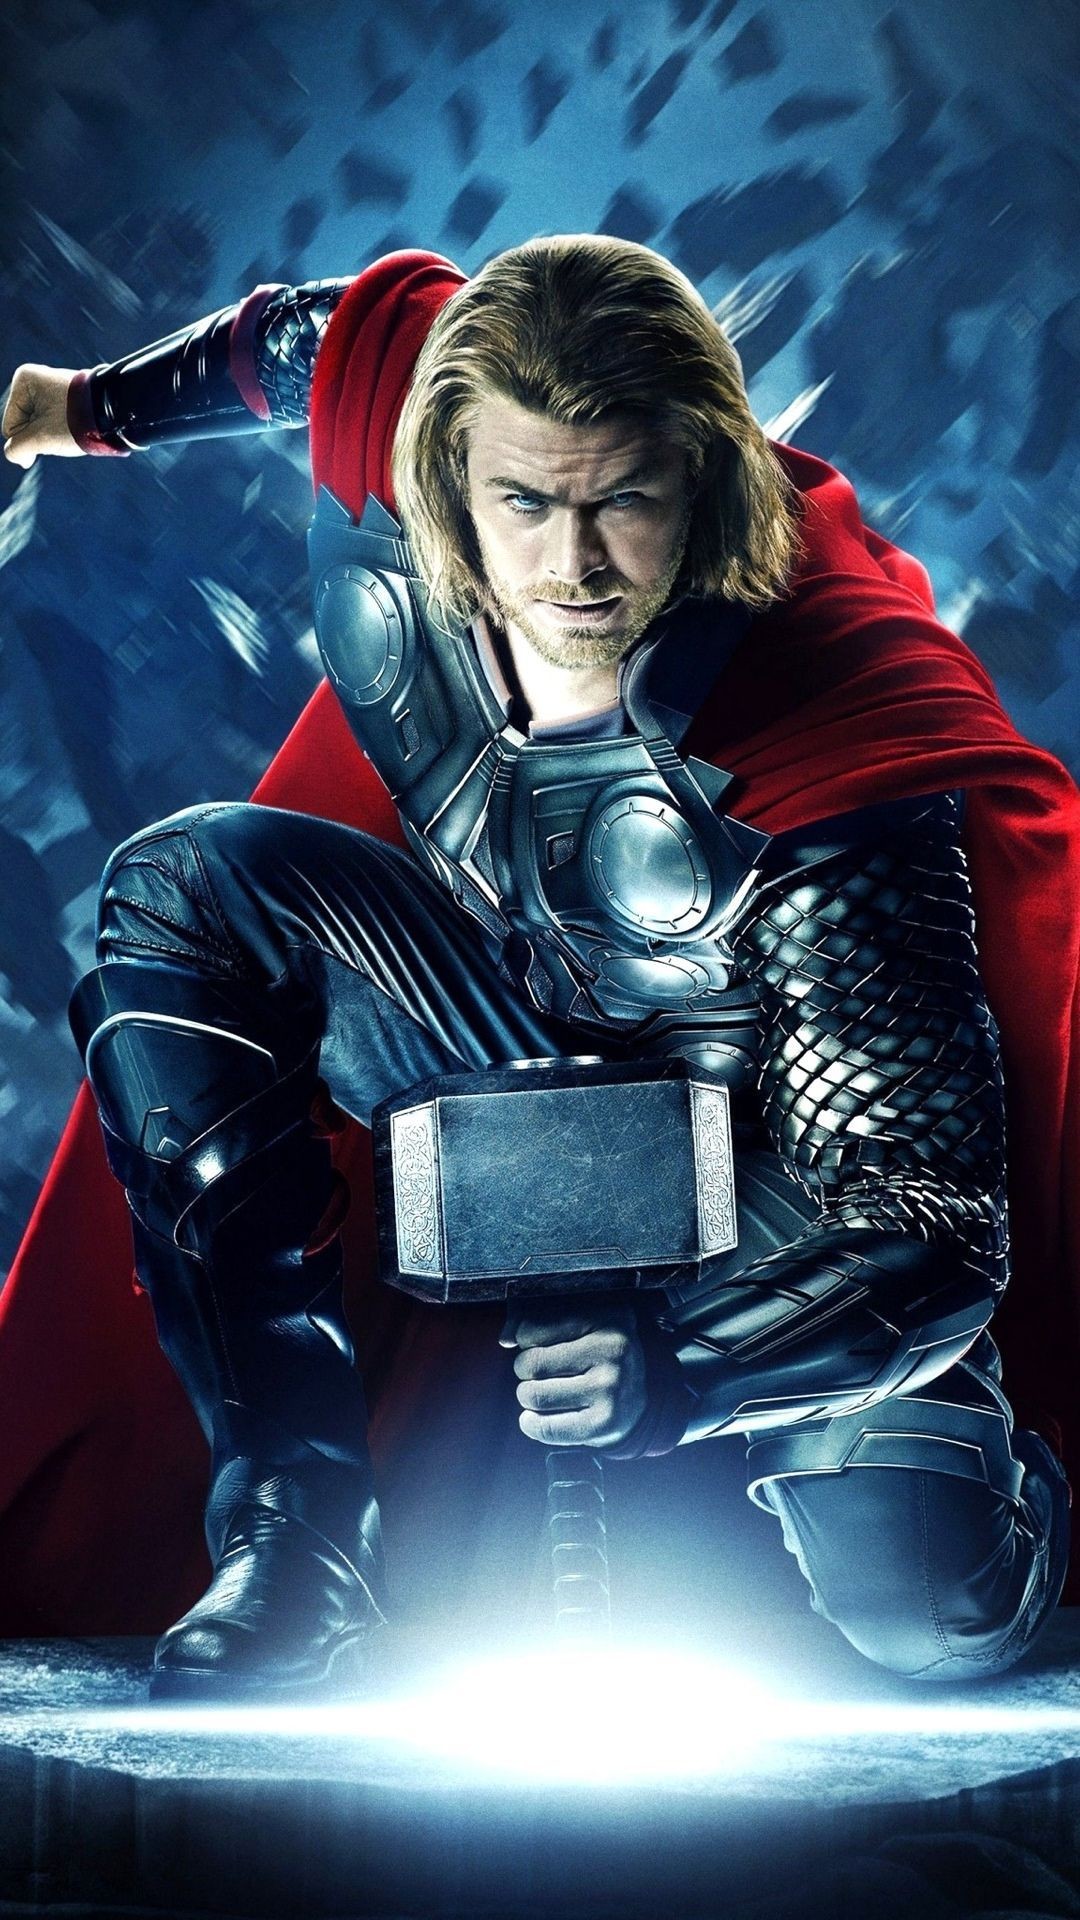 Download Thor Movie Mobile Wallpaper 4076 2373034076 - Thor Hd Wallpapers  For Mobile Download - 1080x1920 Wallpaper 